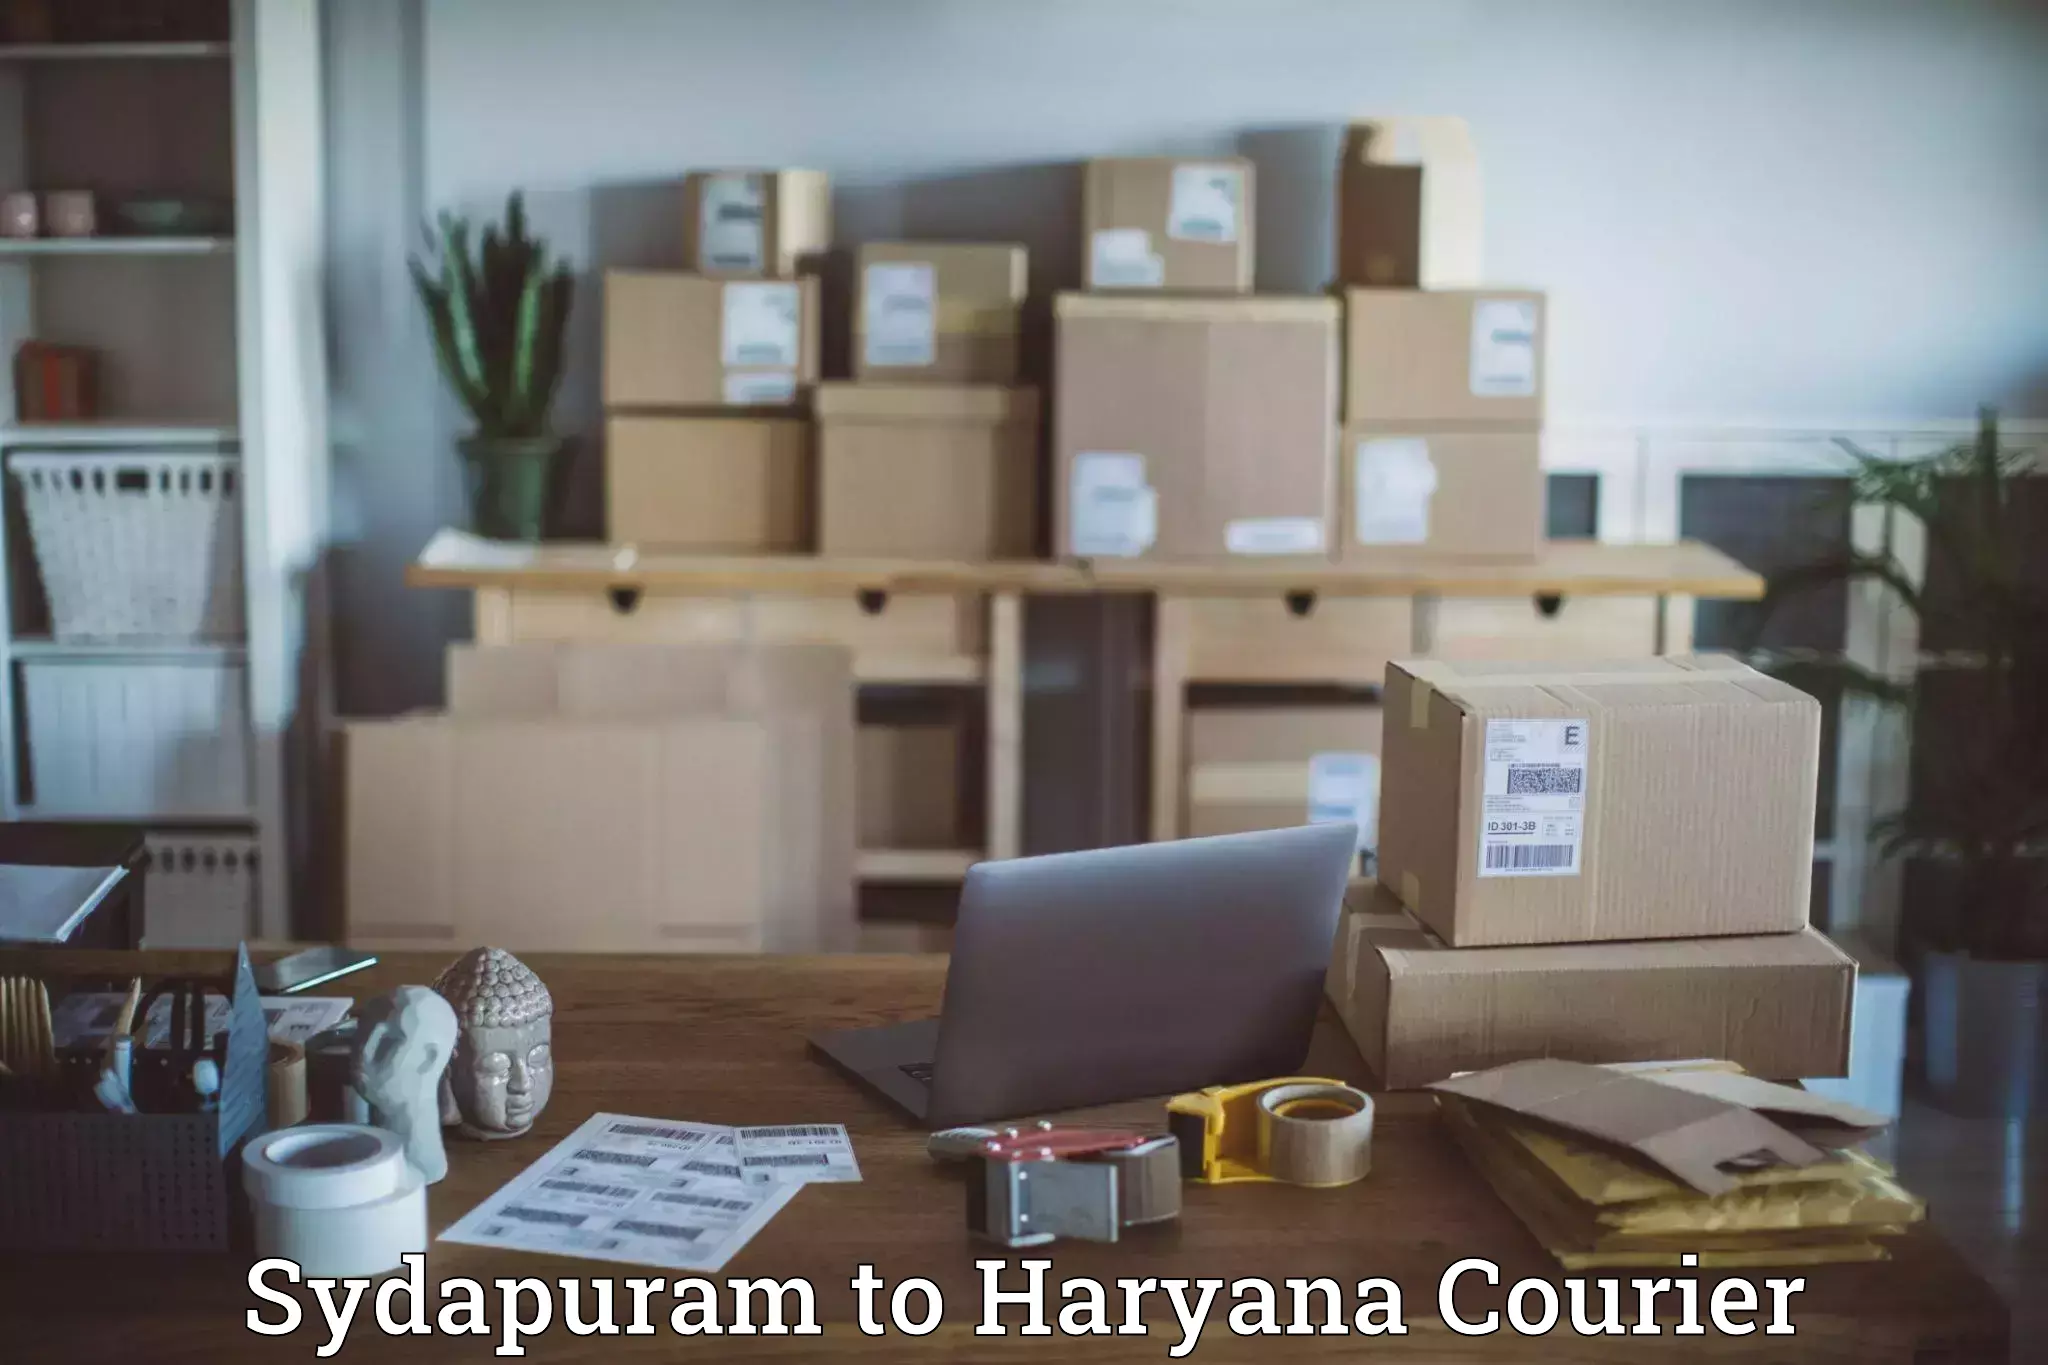 Overnight delivery Sydapuram to Chaudhary Charan Singh Haryana Agricultural University Hisar